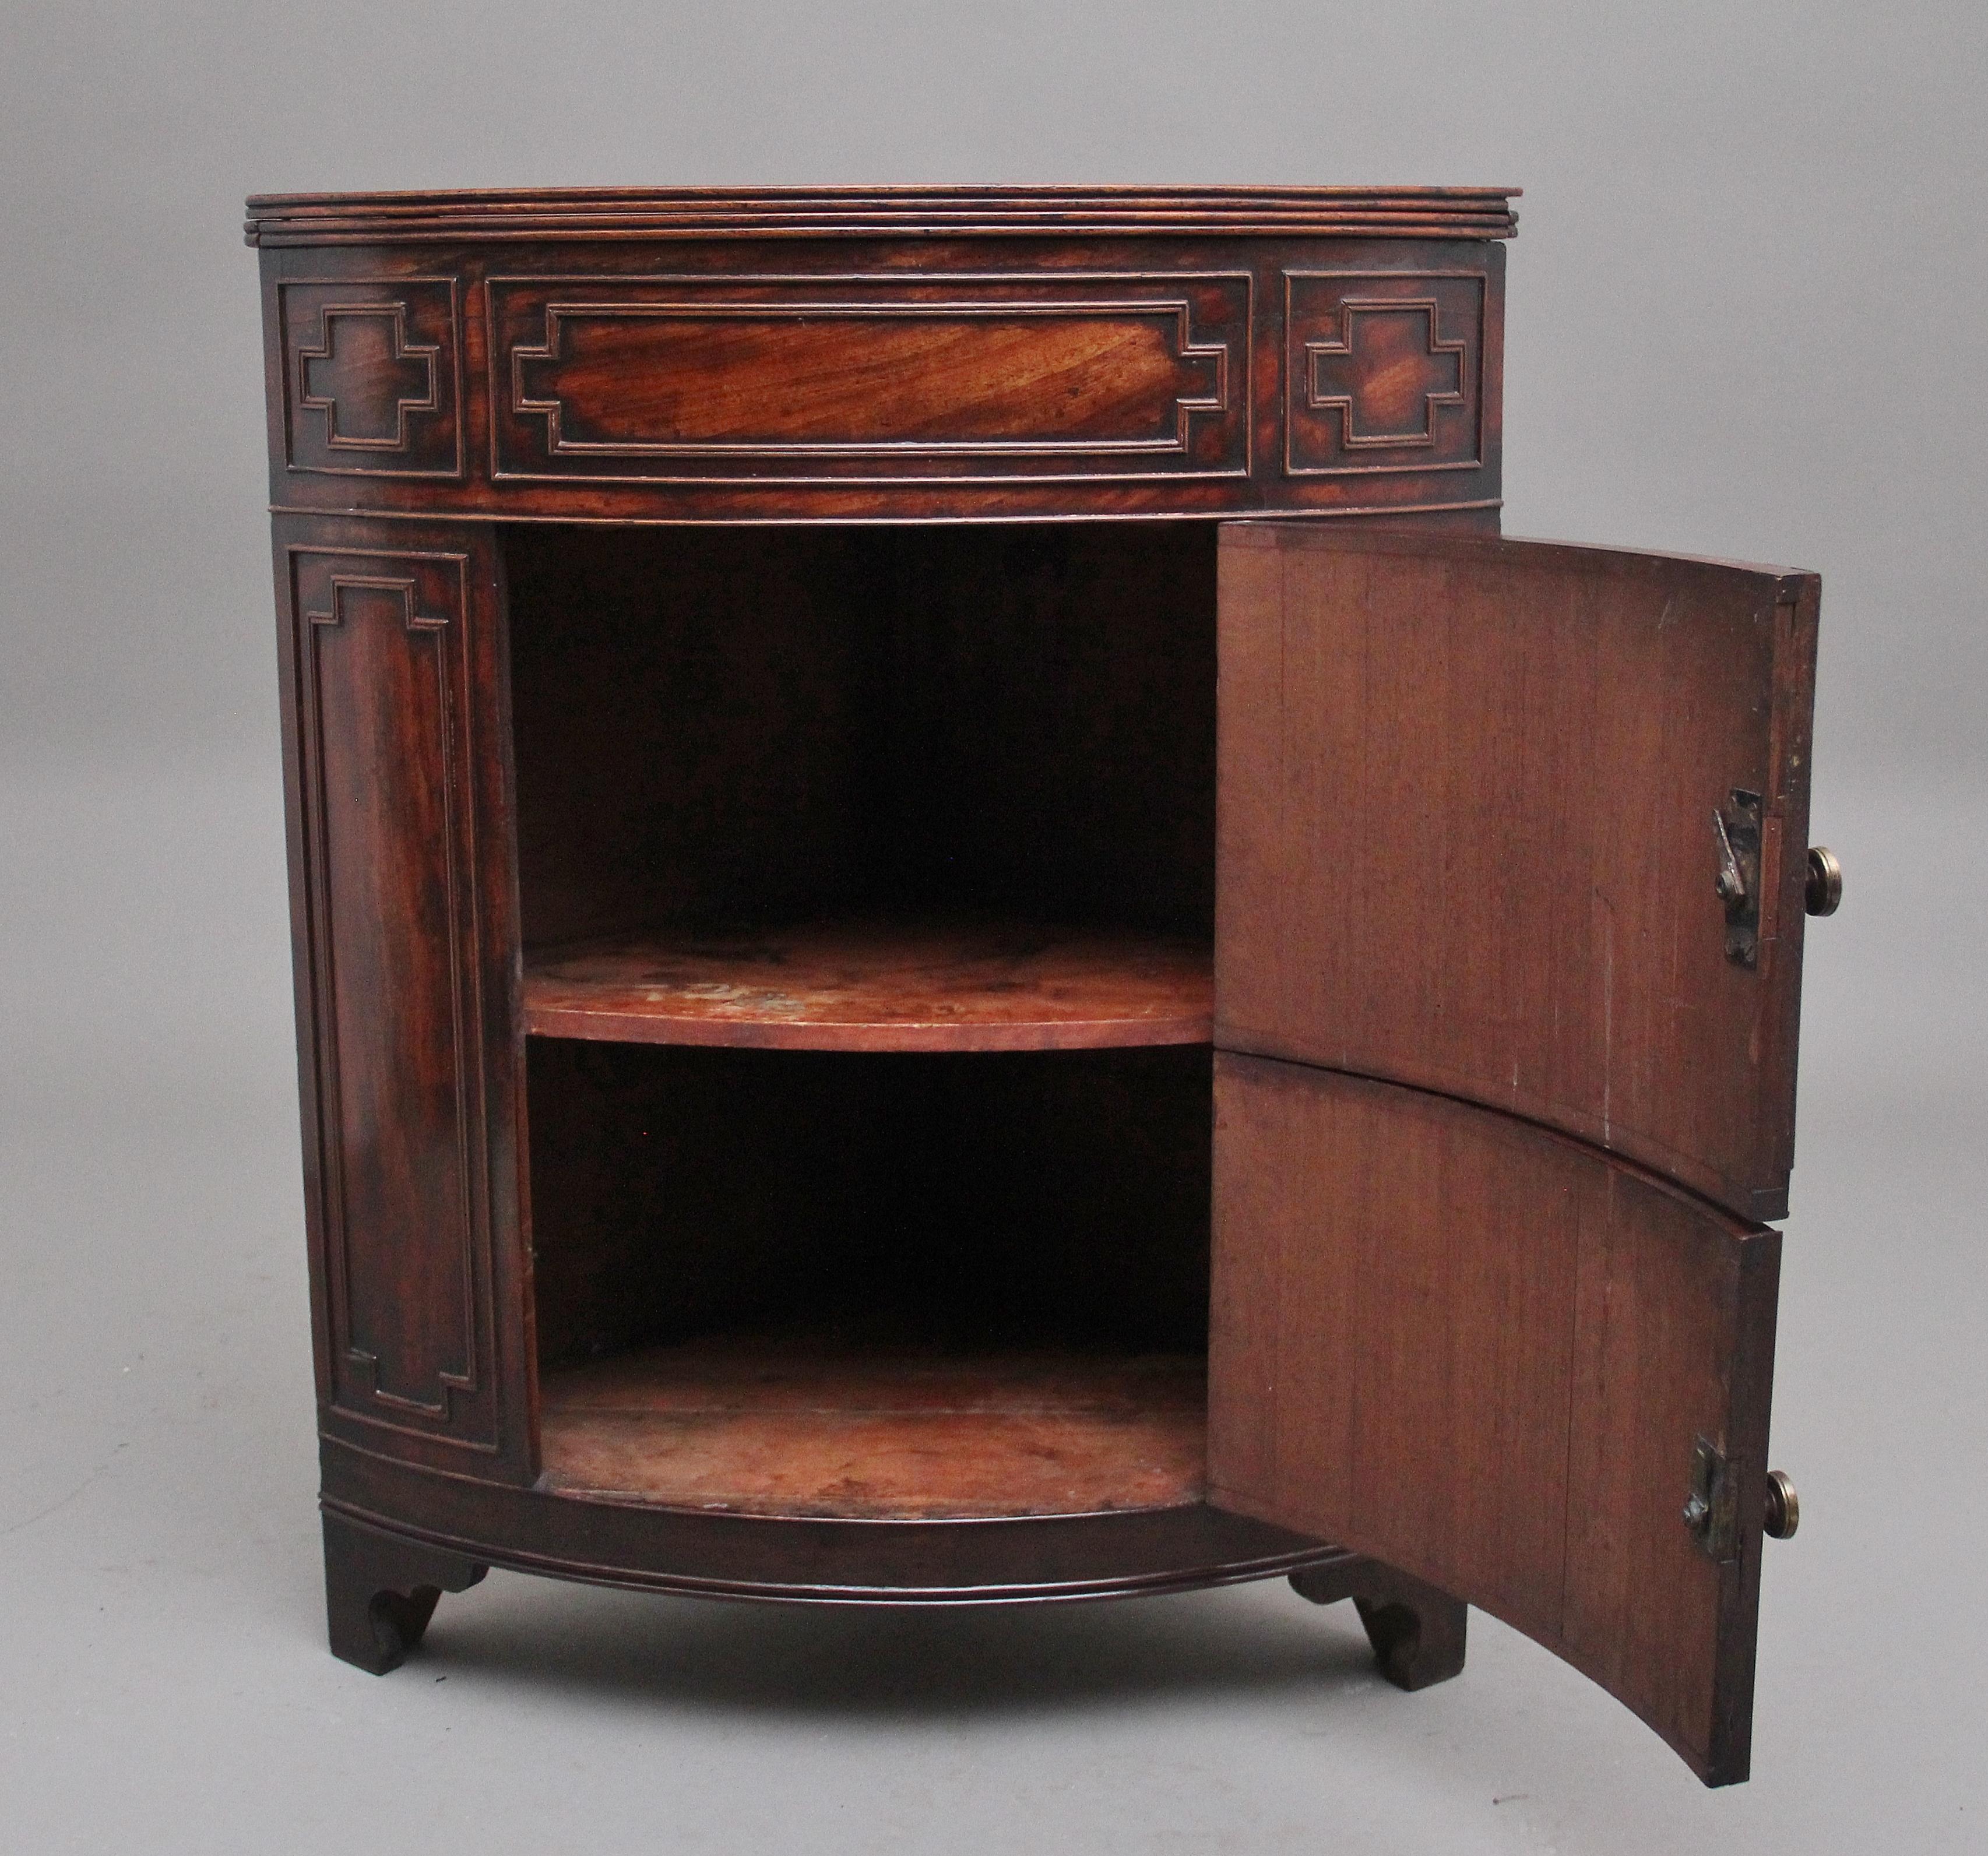 19th Century mahogany corner washstand, the front of the cabinet having decorative applied moulding , two hinged doors opening to reveal a single fixed shelf, the hinged lift up top to opening to act as a decorative splash back and shelf, supported